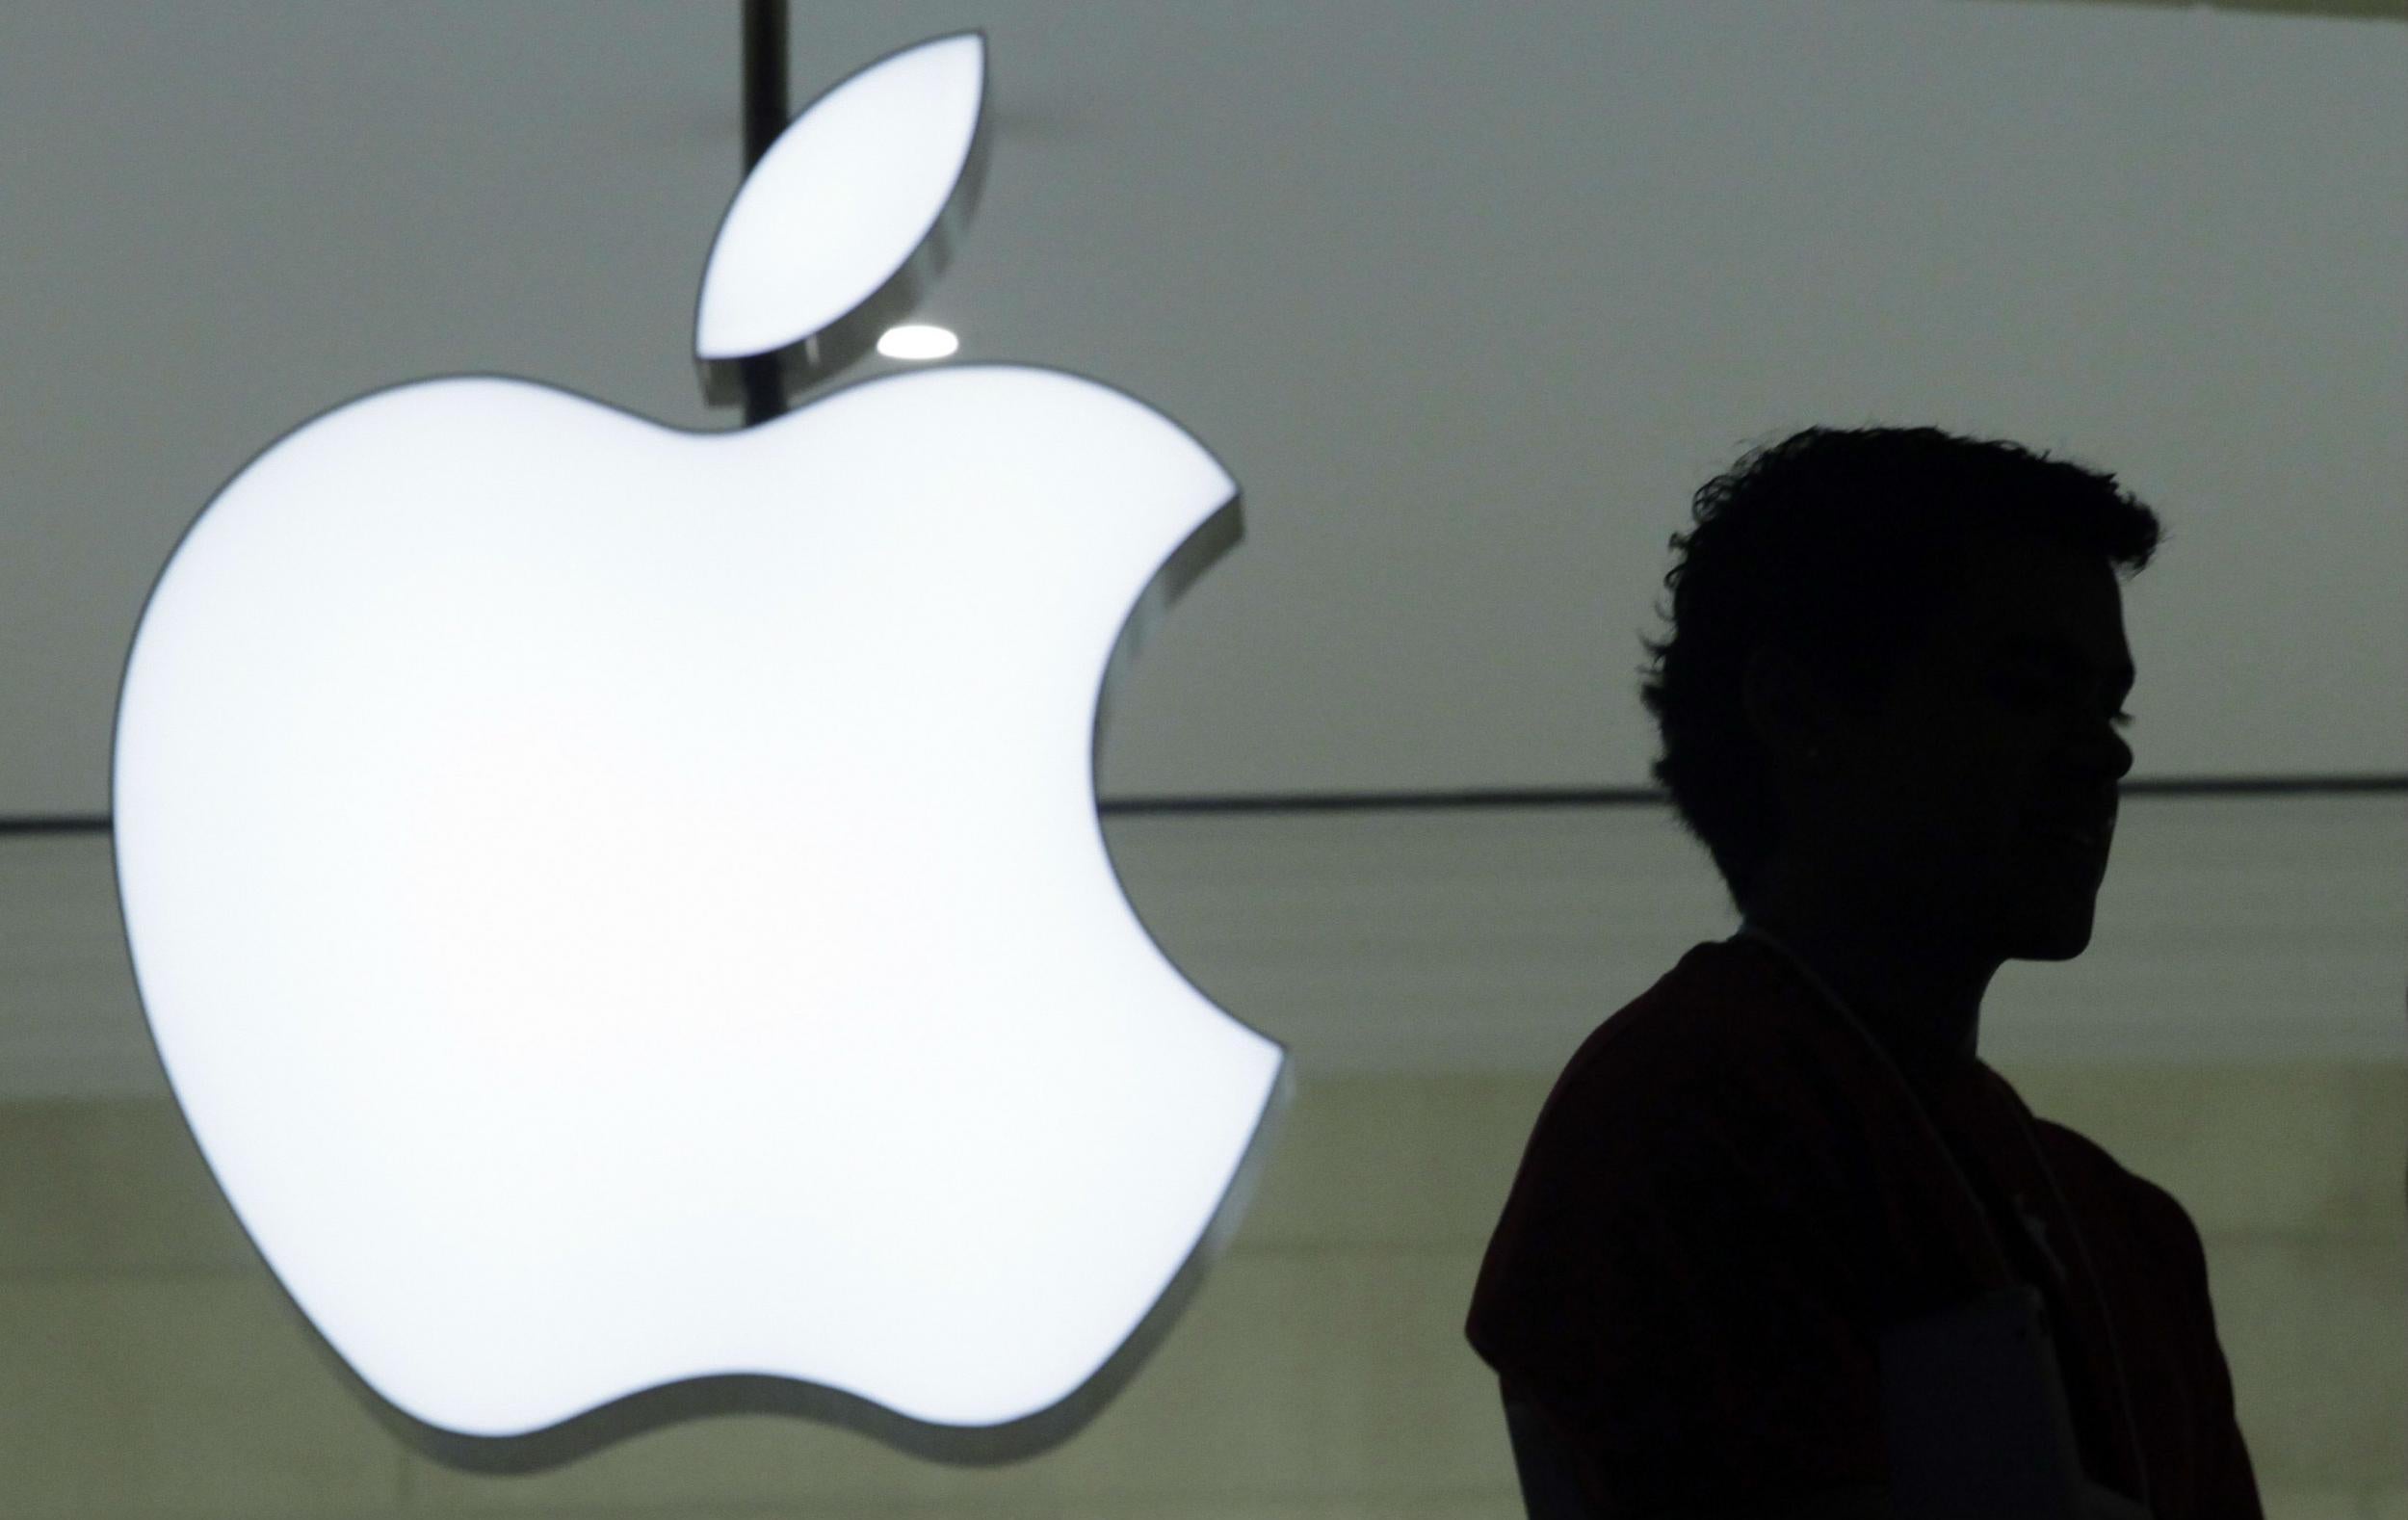 Apple was able to siphon off up to two-thirds of its global profits through Irish-registered companies